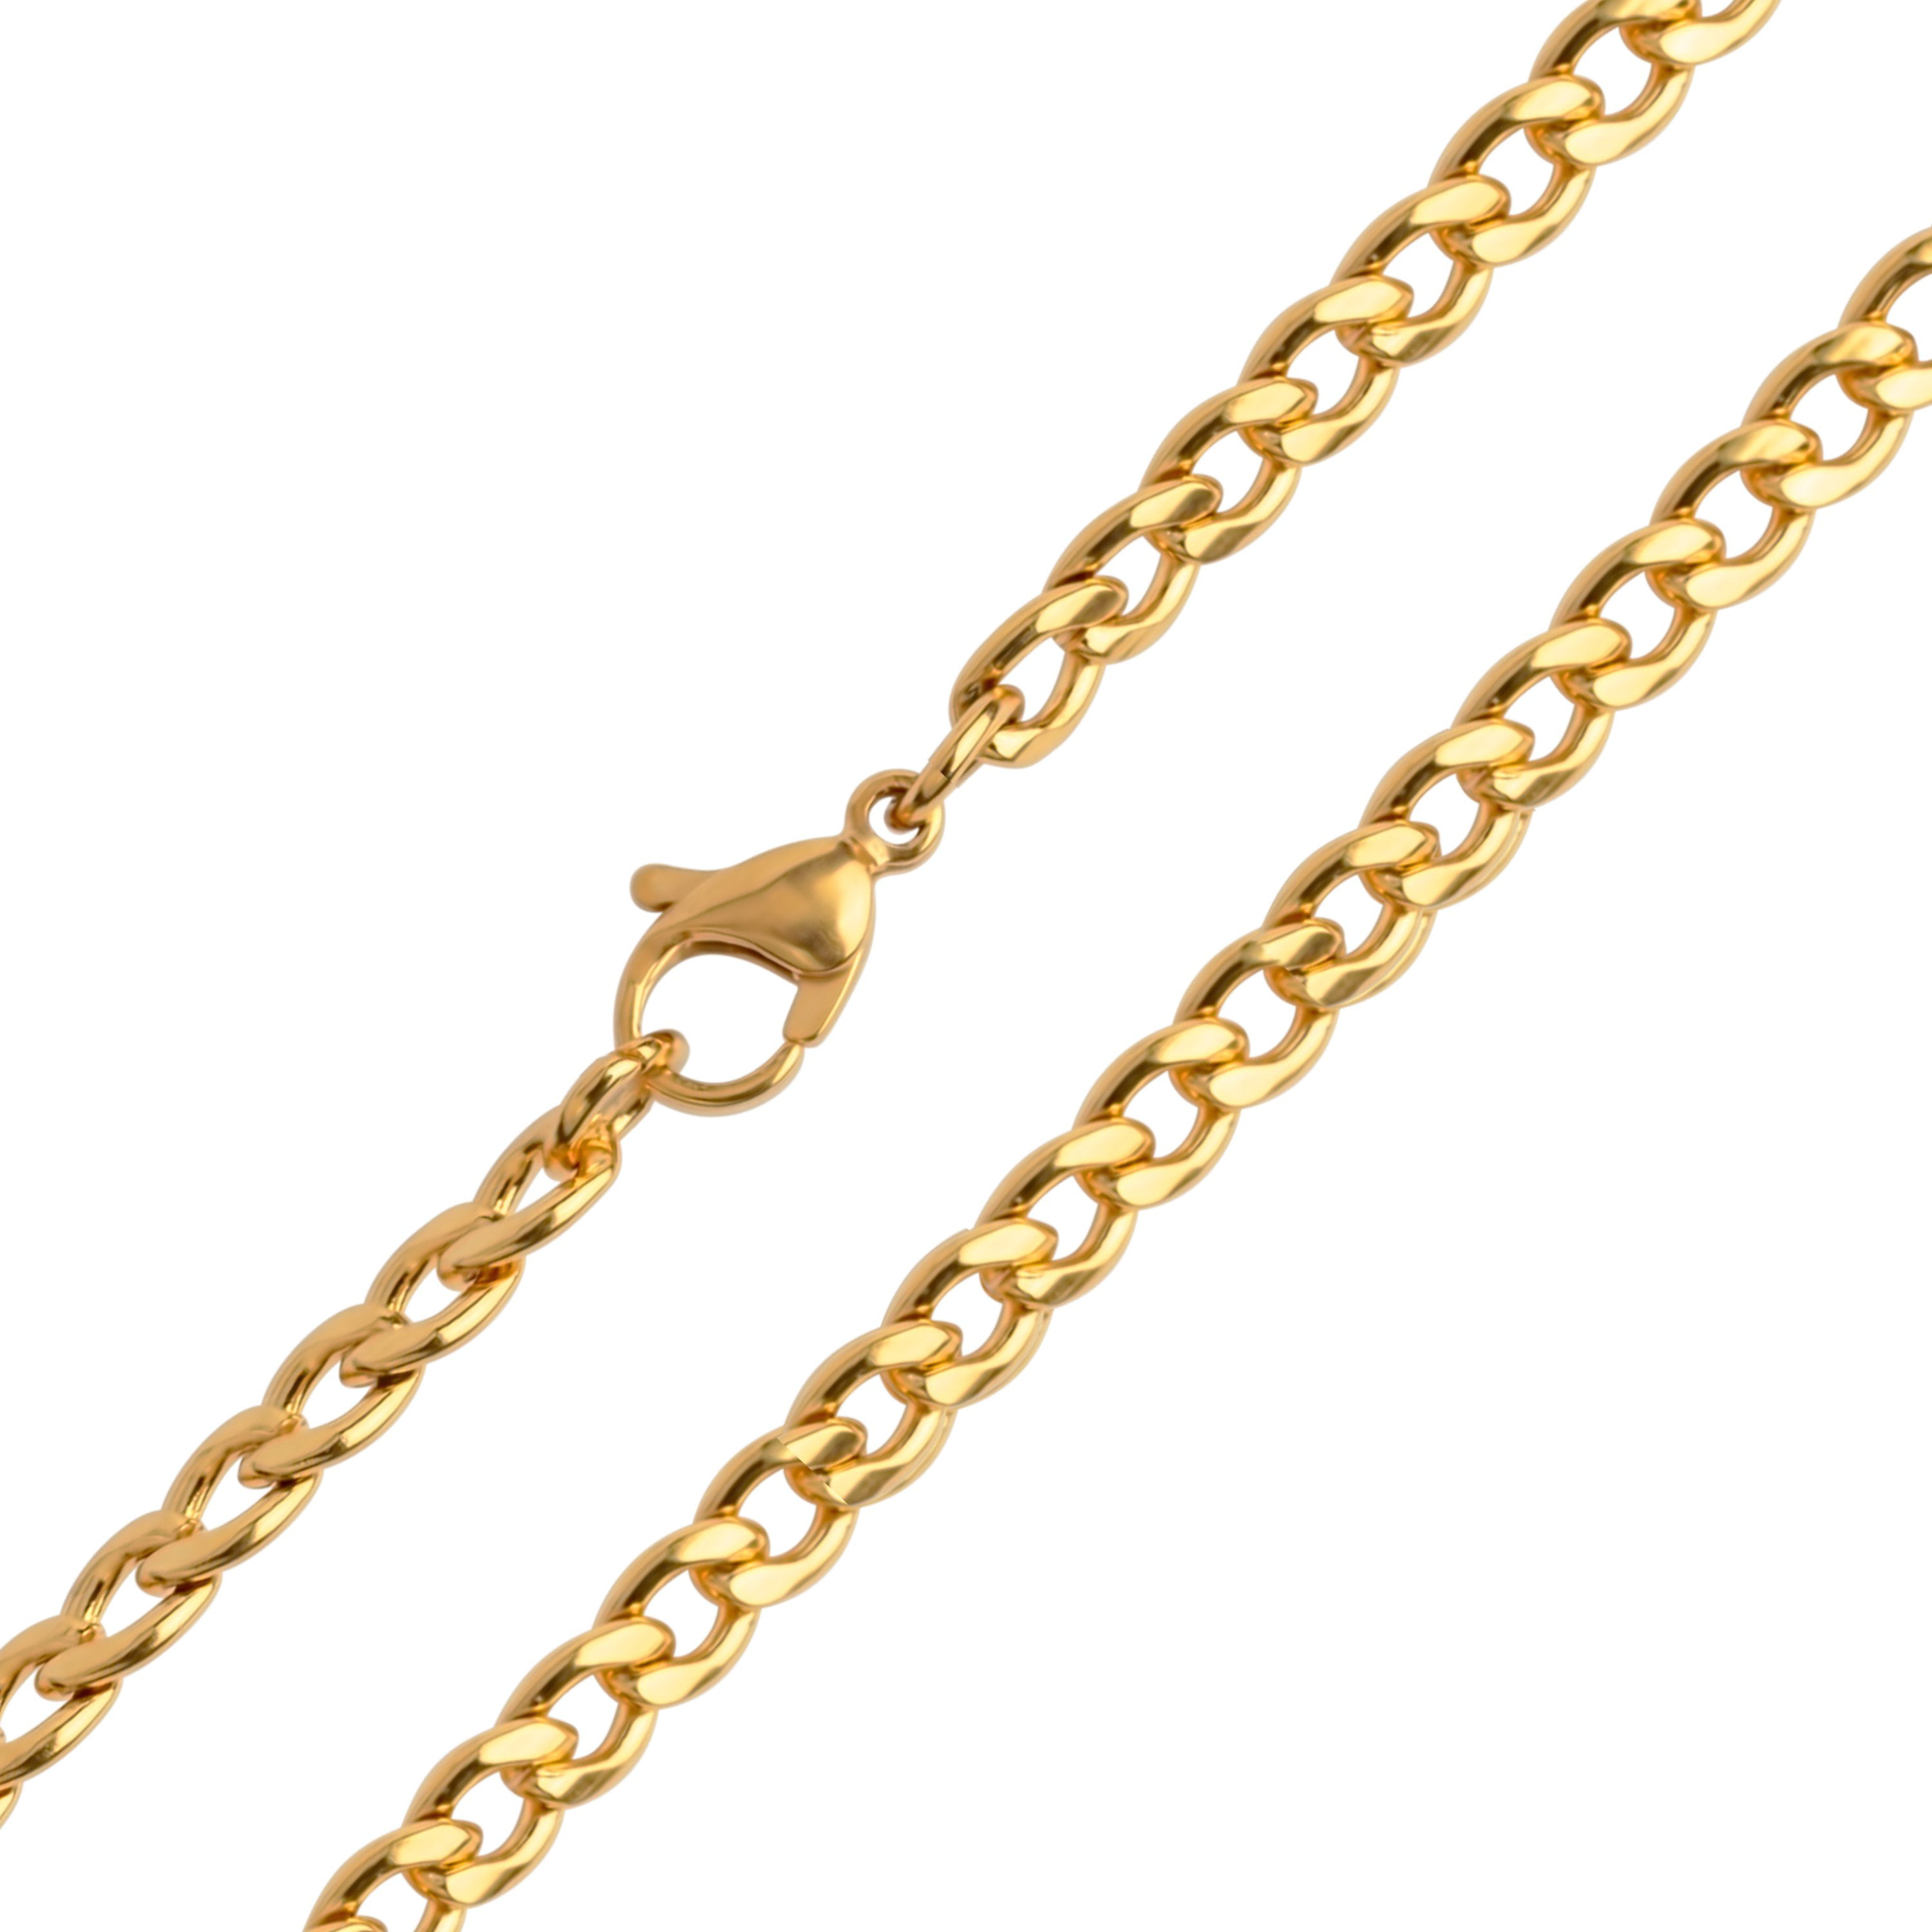  20 Pack Necklace Chains Gold Plated Stainless Steel Cable Chain  Necklace Bulk for Jewelry Making, 24 Inches : Arts, Crafts & Sewing